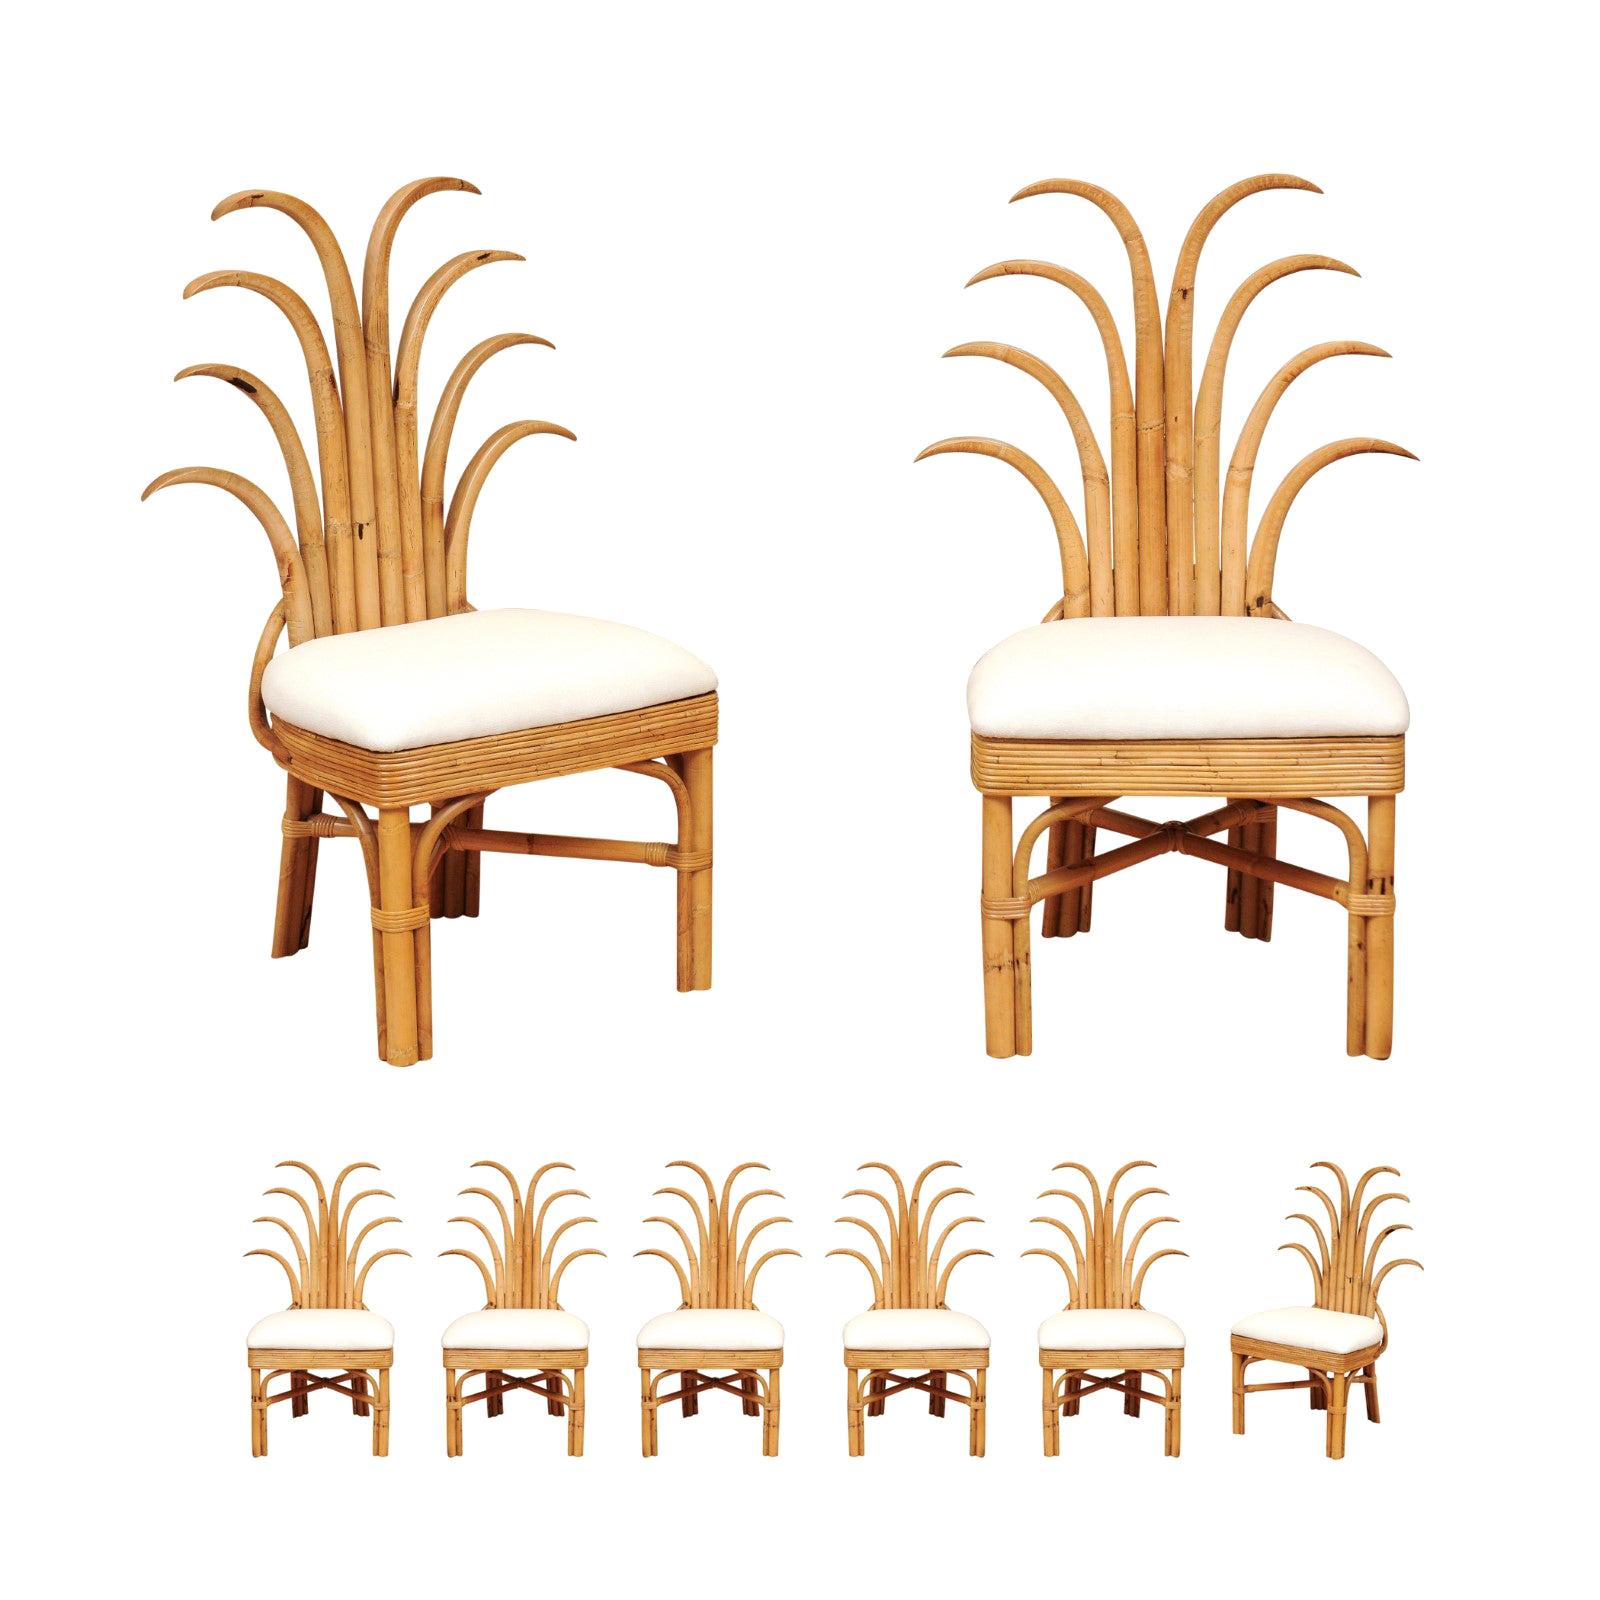 Jaw-Dropping Set of 8 Custom Made Palm Frond Dining Chairs, circa 1950